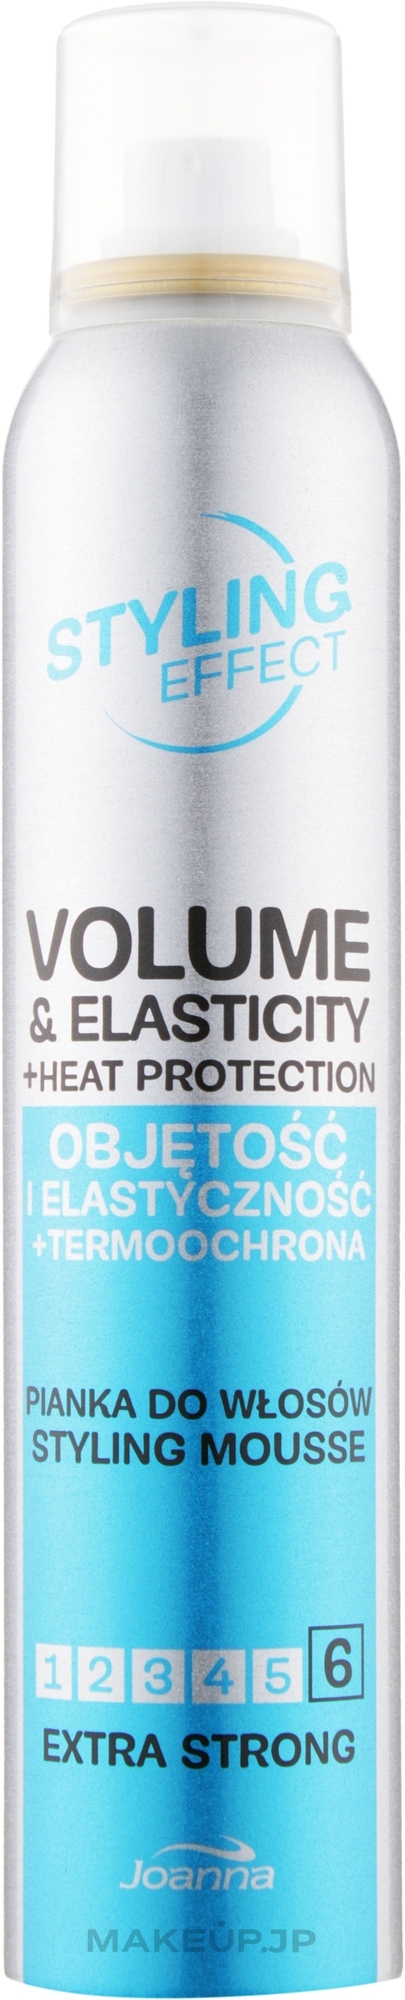 Extra Strong Hold Volume & Elasticity Hair Mousse - Joanna Styling Effect Styling Mousse Extra Strong — photo 150 ml